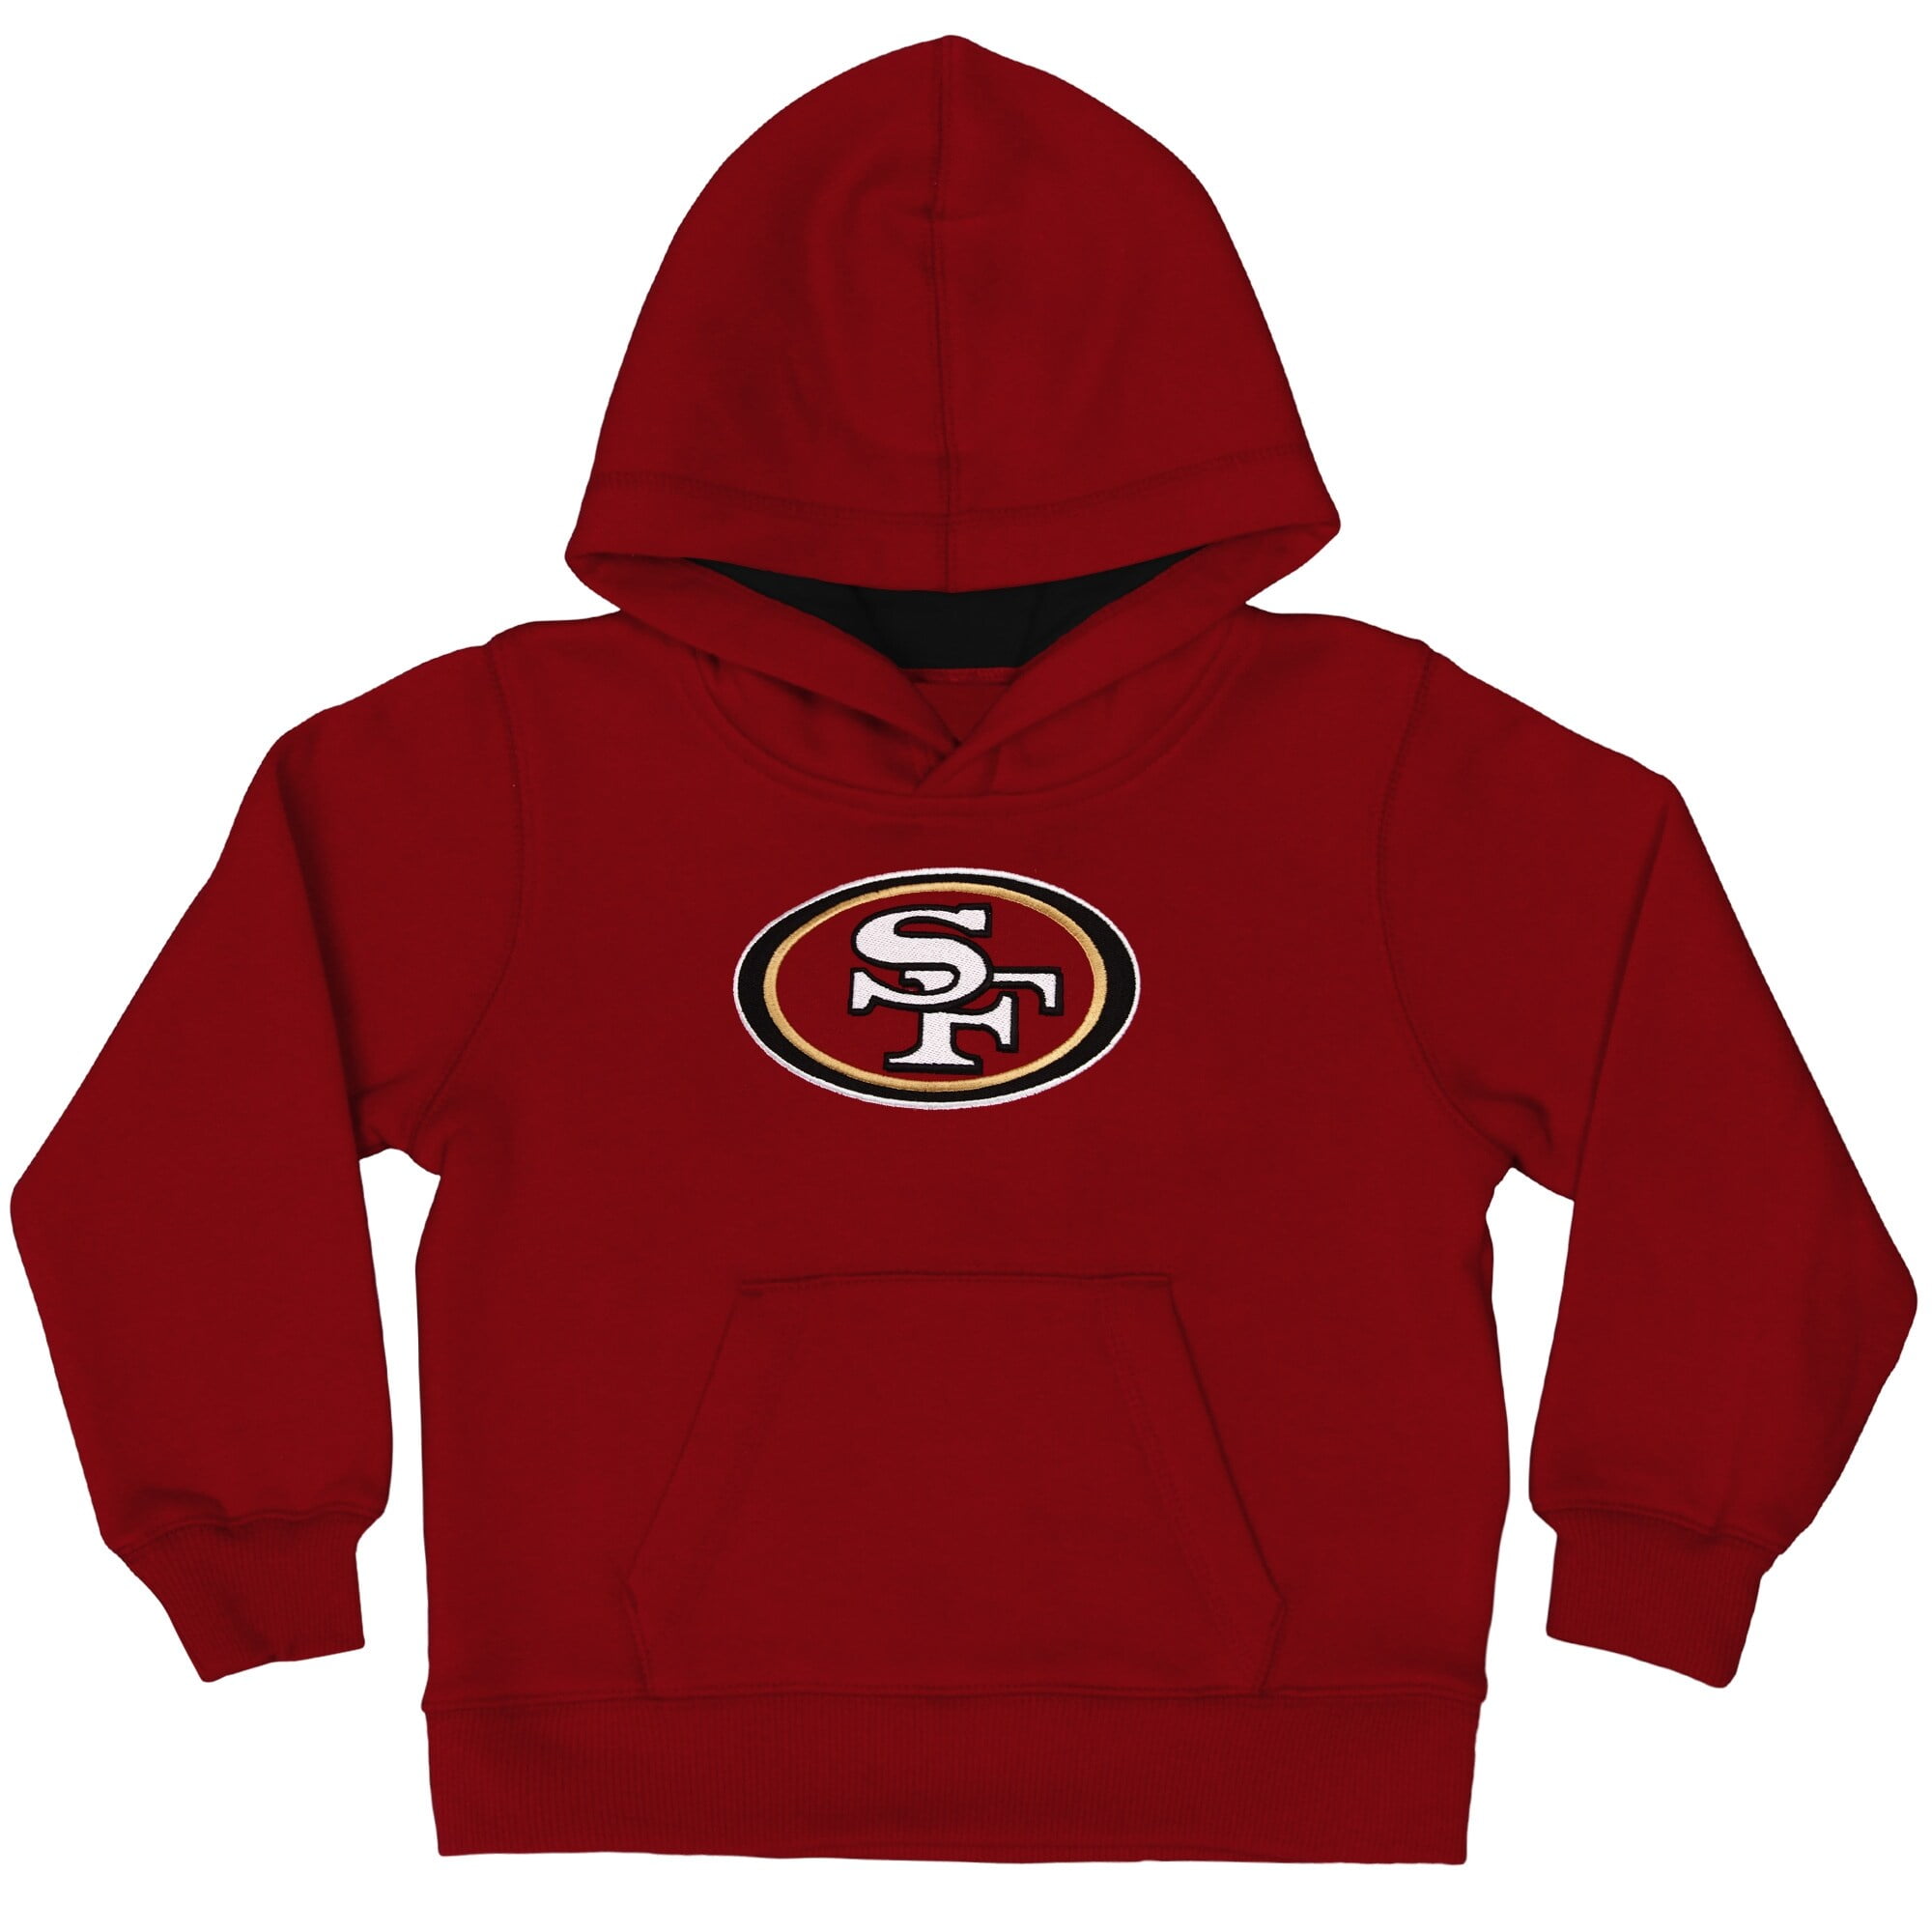 49ers gear for toddlers